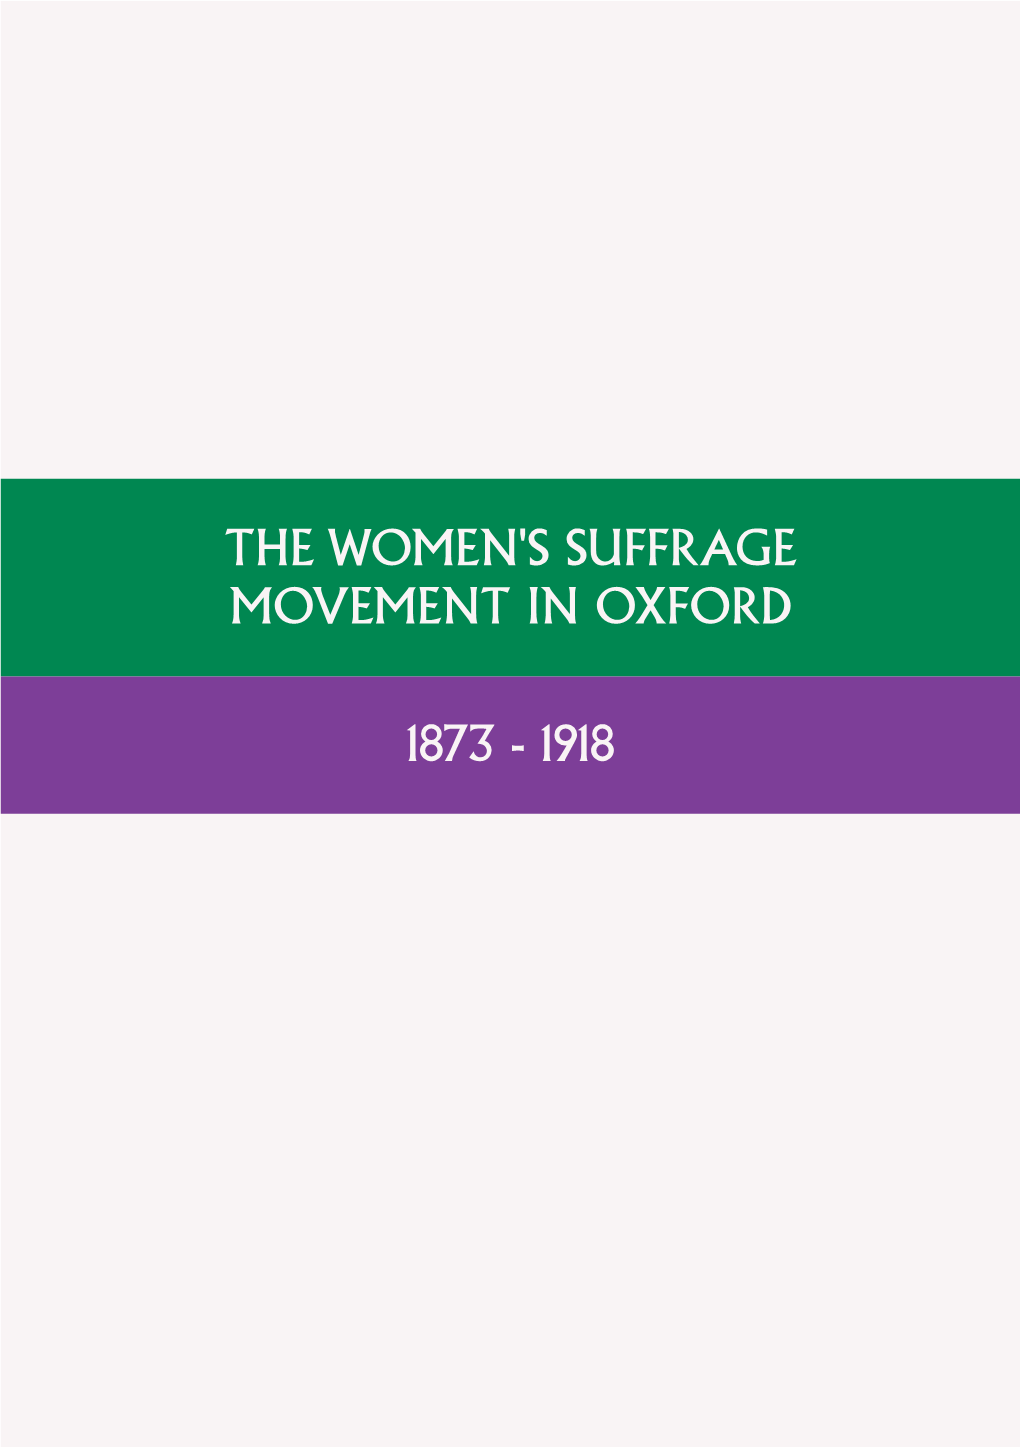 The Women's Suffrage Movement in Oxford 1873